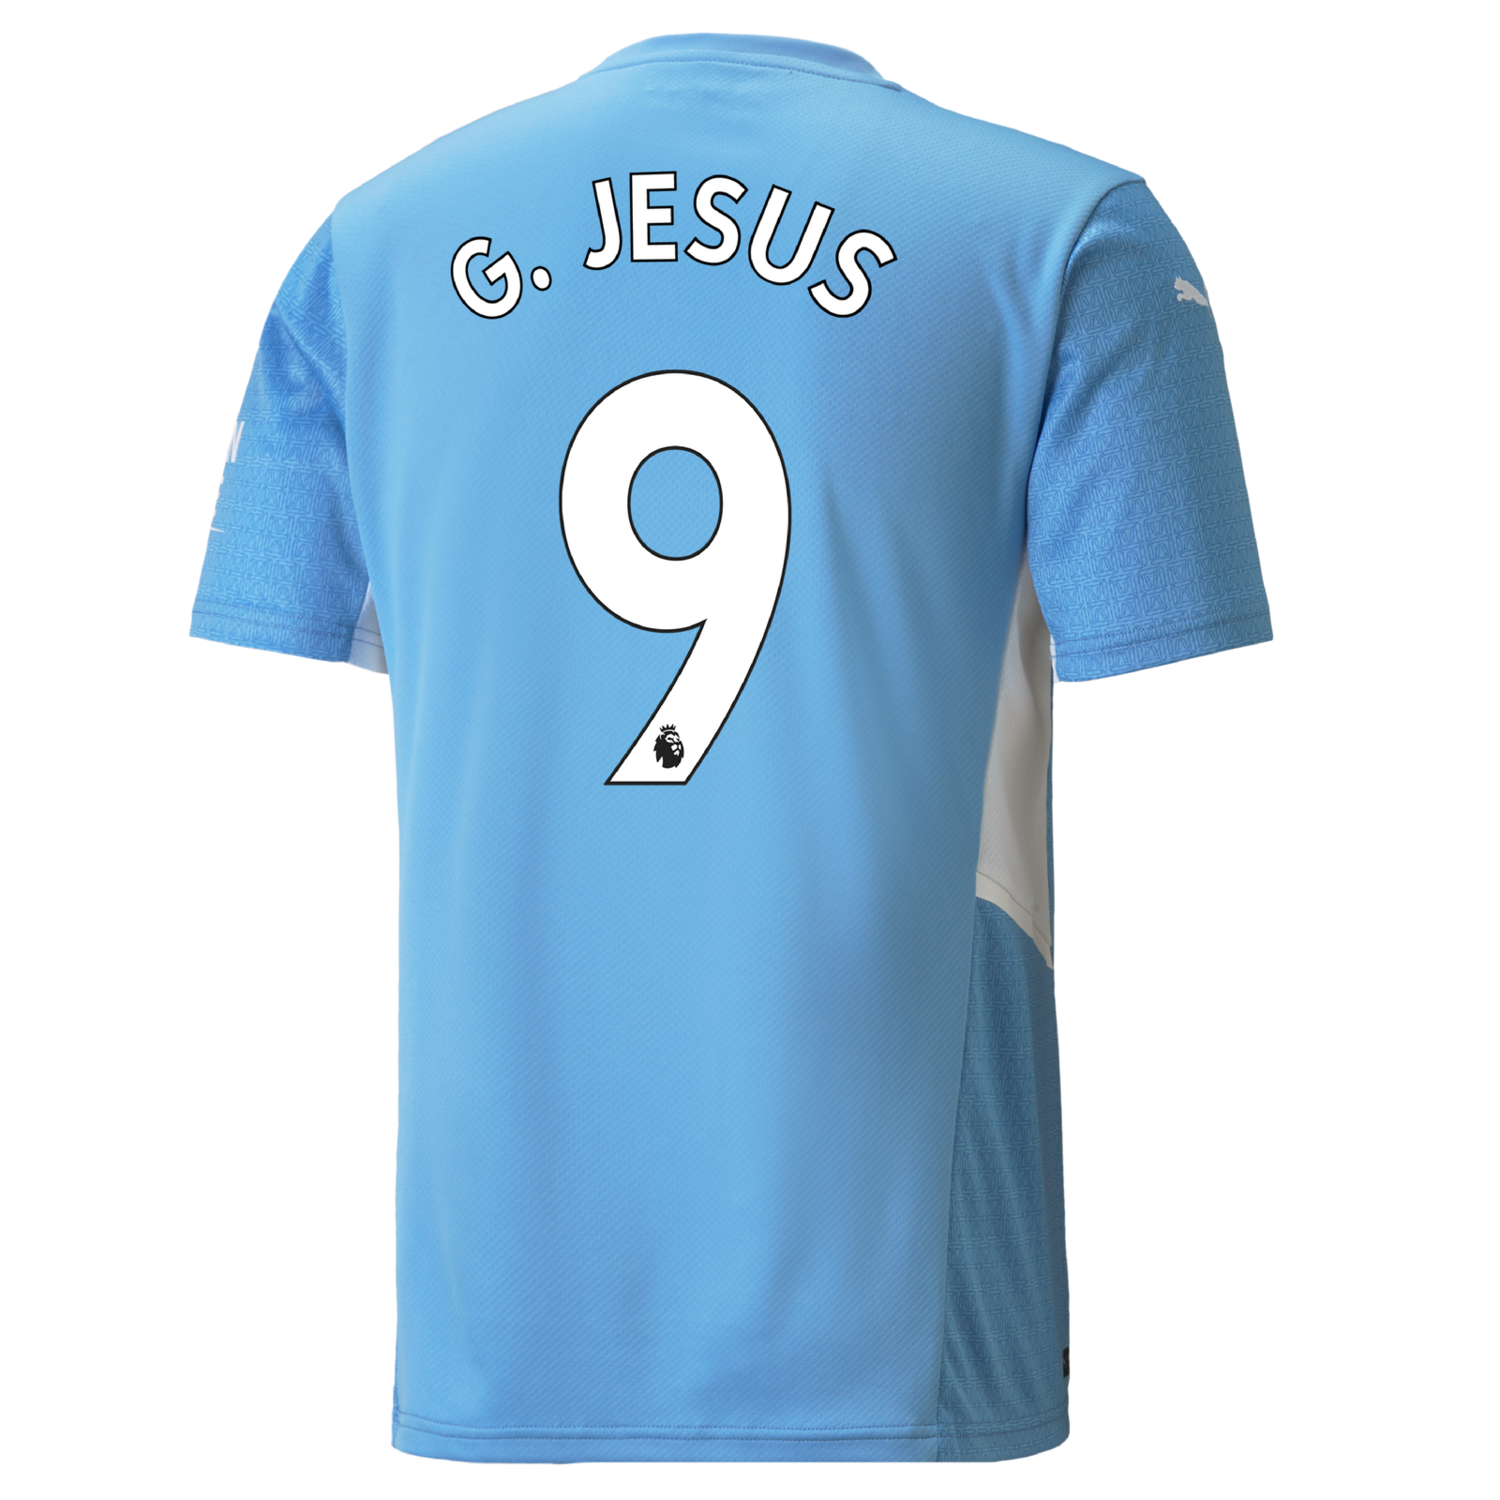 Manchester City G.Jesus 9 Home Jersey  21/22